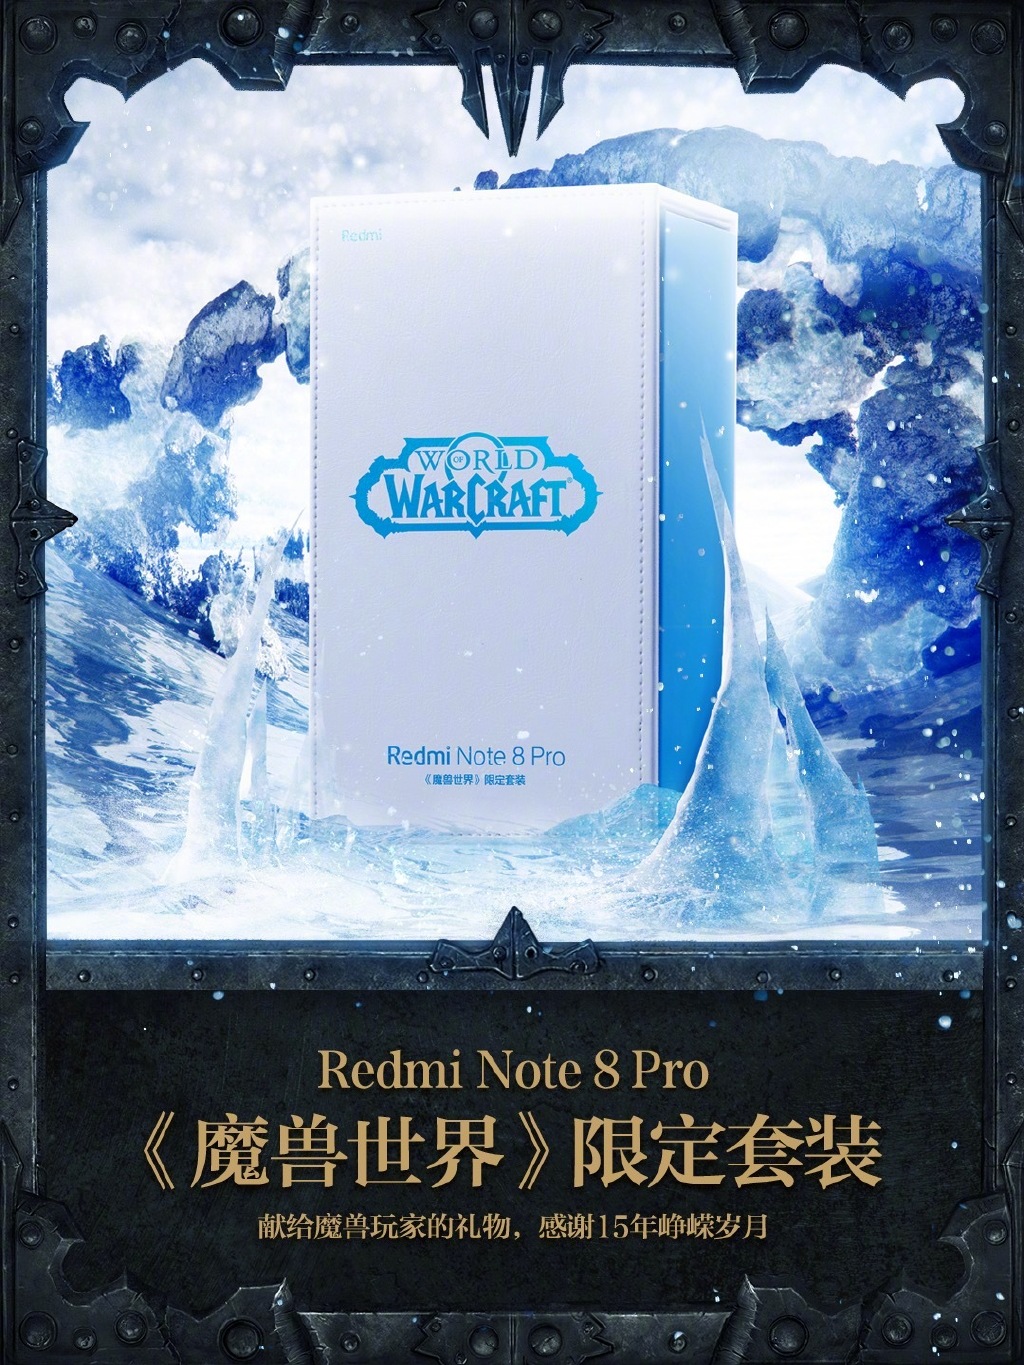 Redmi Note 8 Pro World of Warcraft Limited Edition